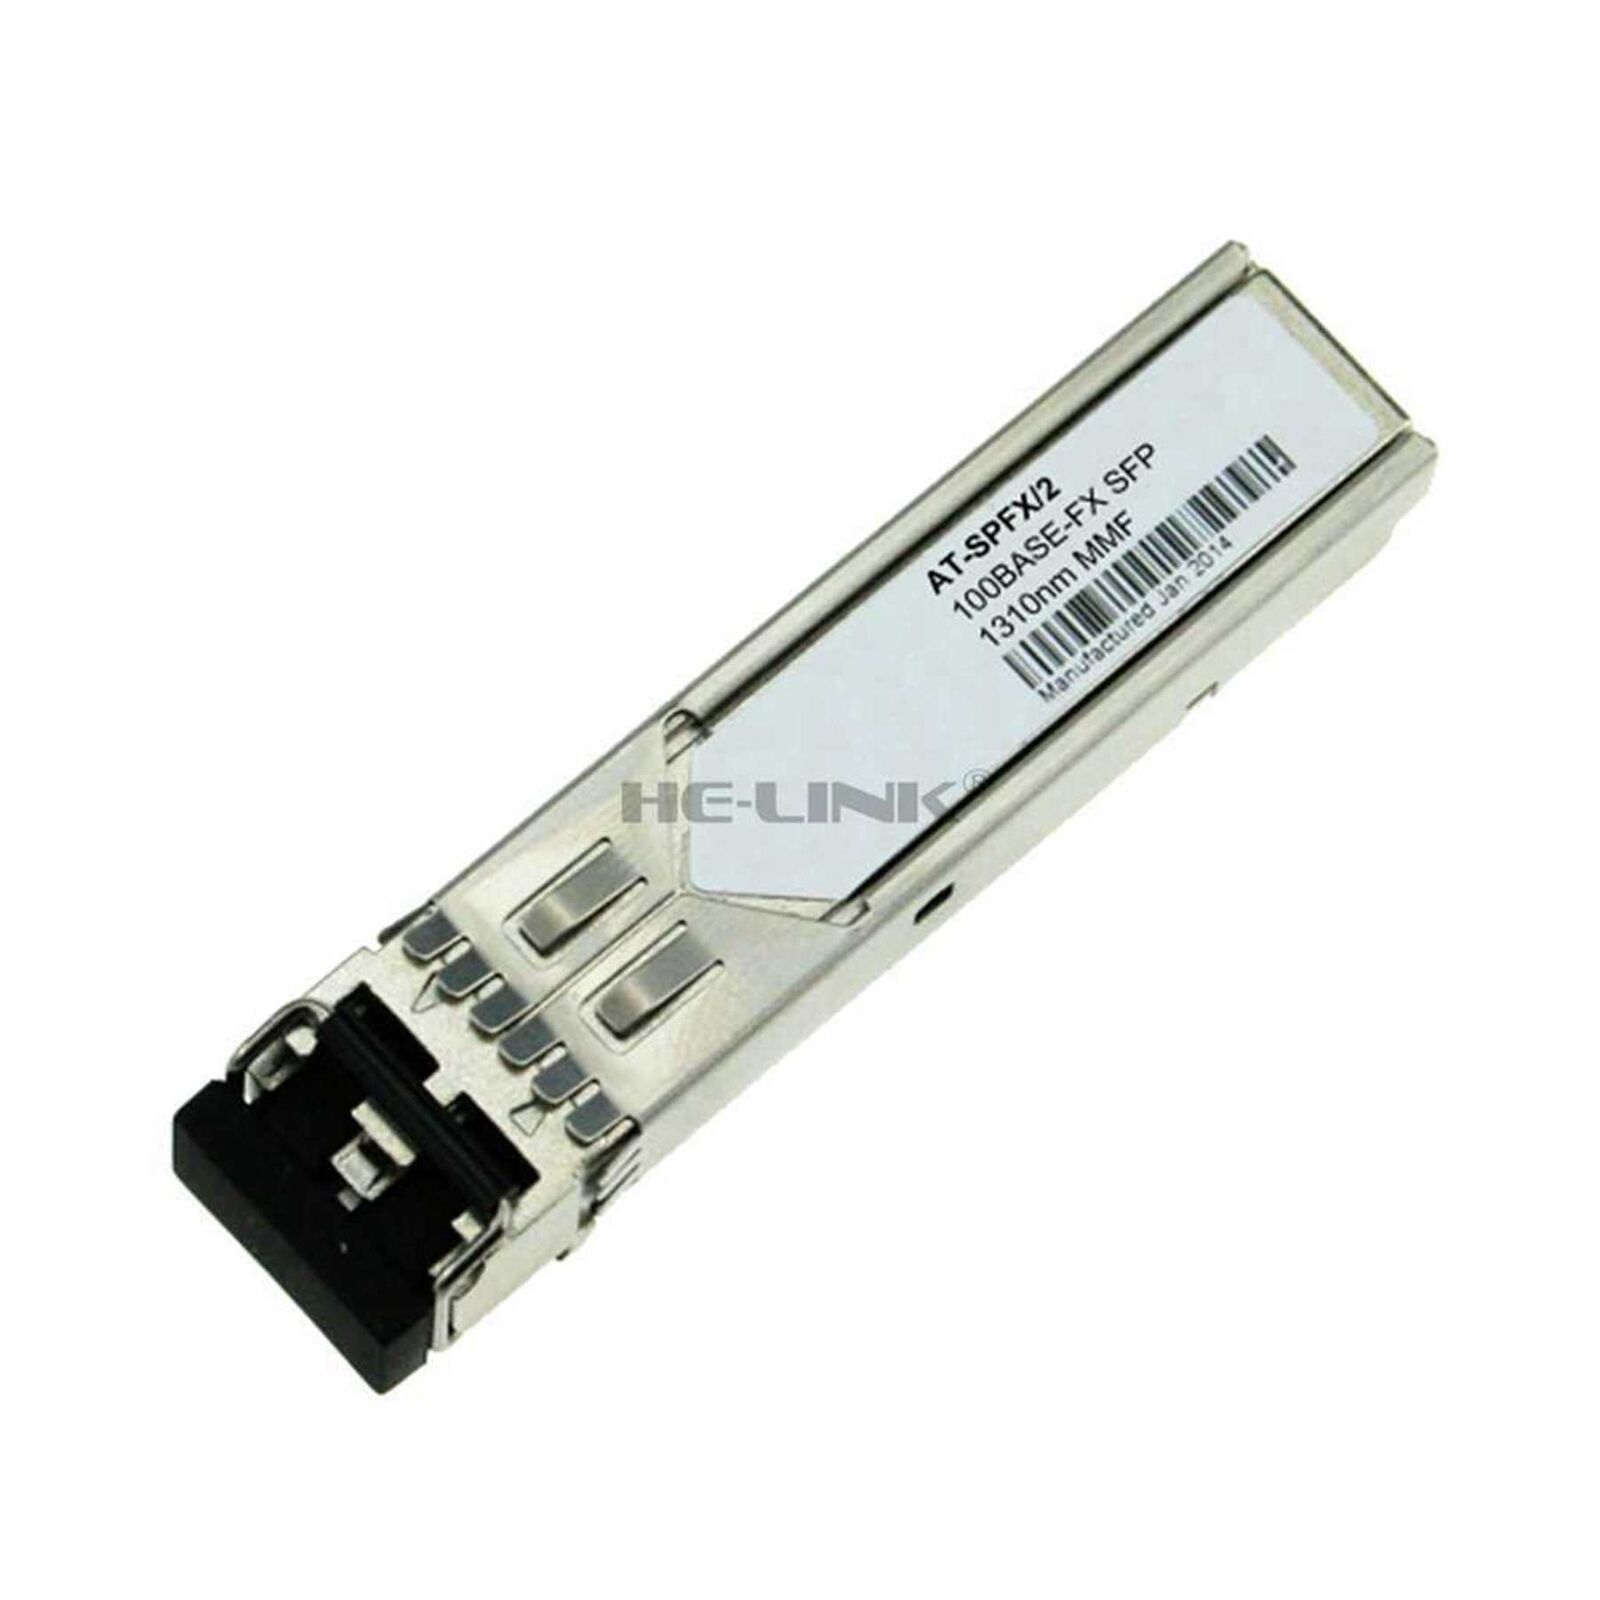 AT-SPFX/2 Allied Telesis Compatible 100Mbps FX SFP 1310nm 2km Transceiver